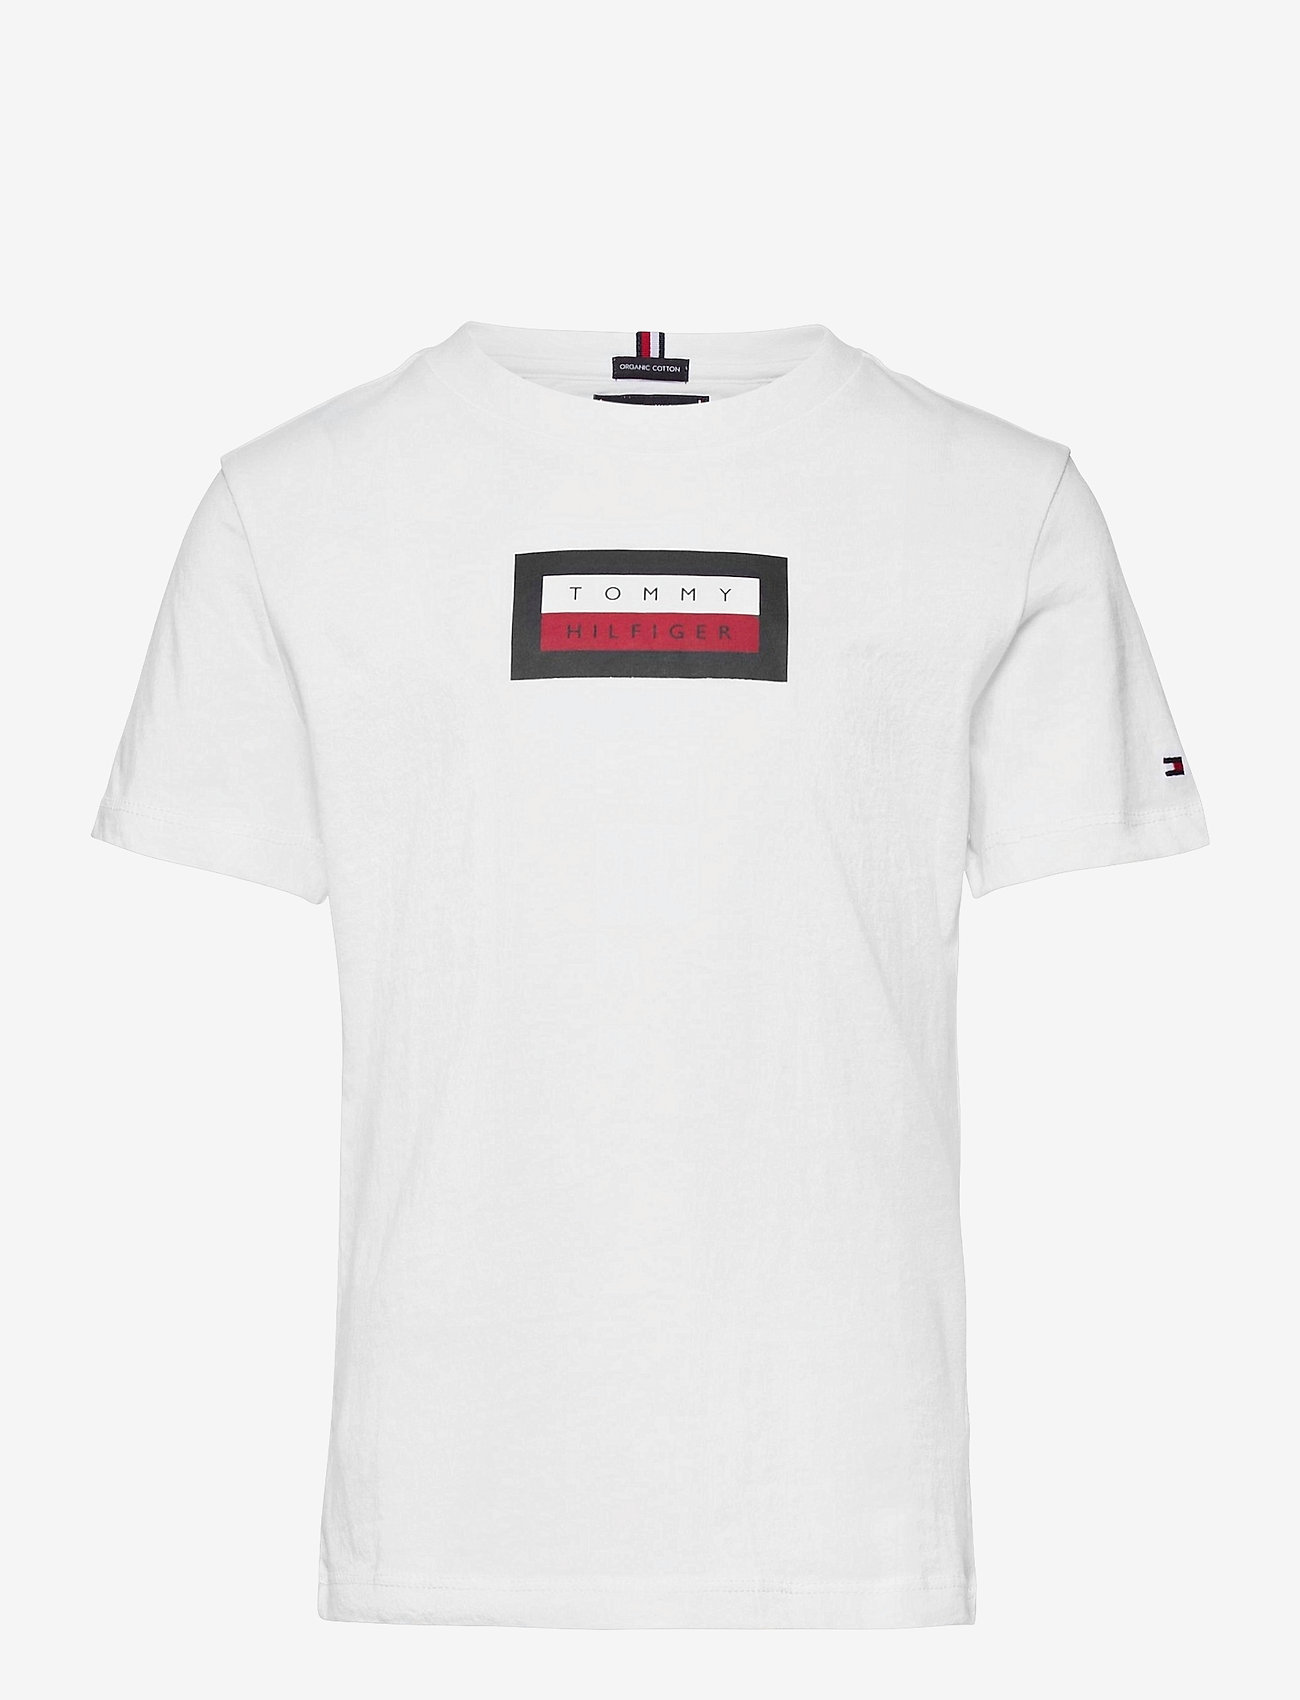 tommy hilfiger graphic tees